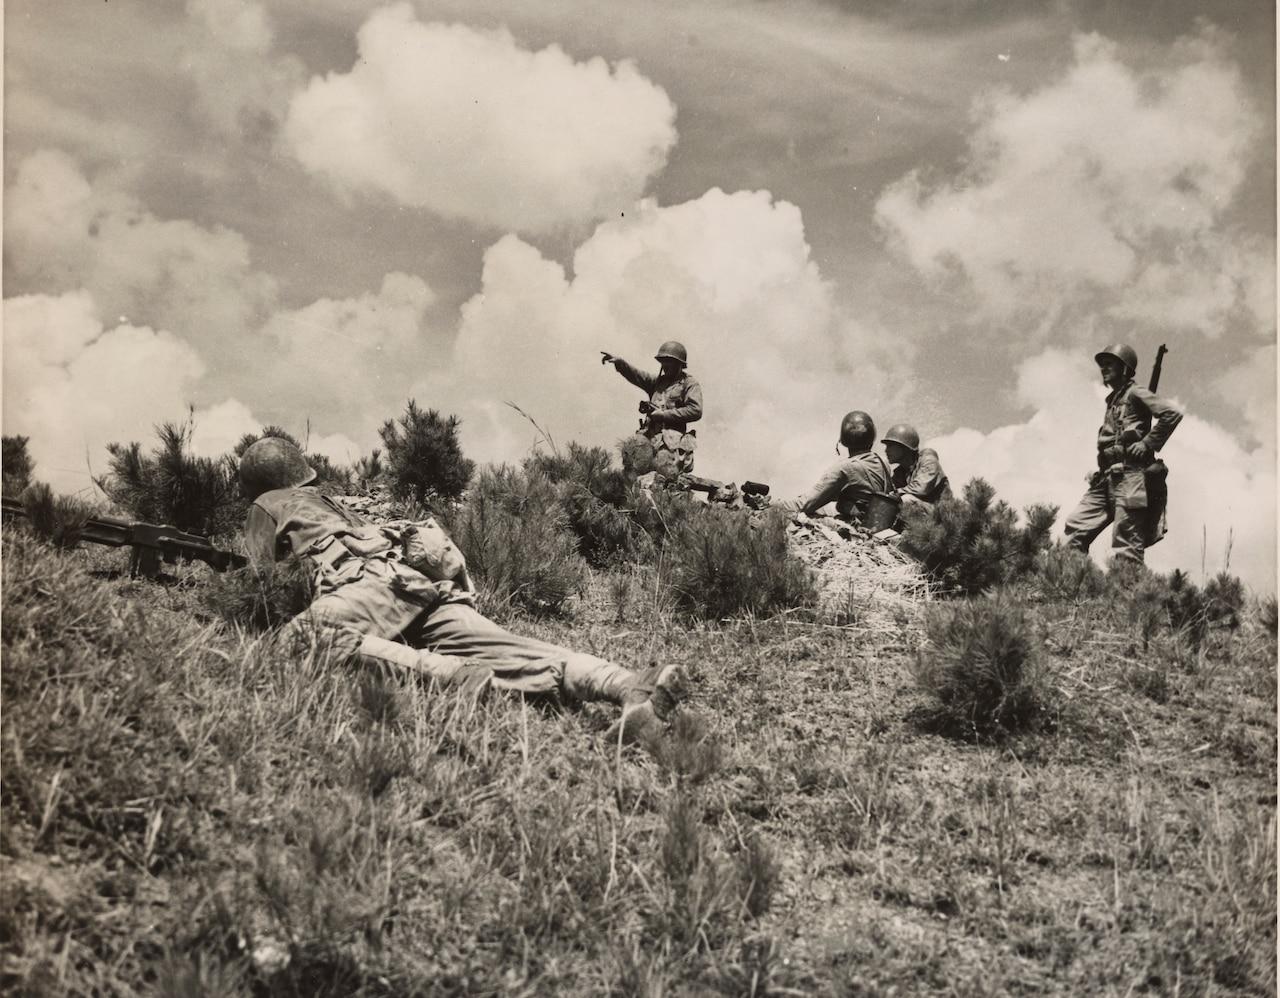 A soldier with a machine gun lies on a hill as other soldiers stand and squat further away from him.